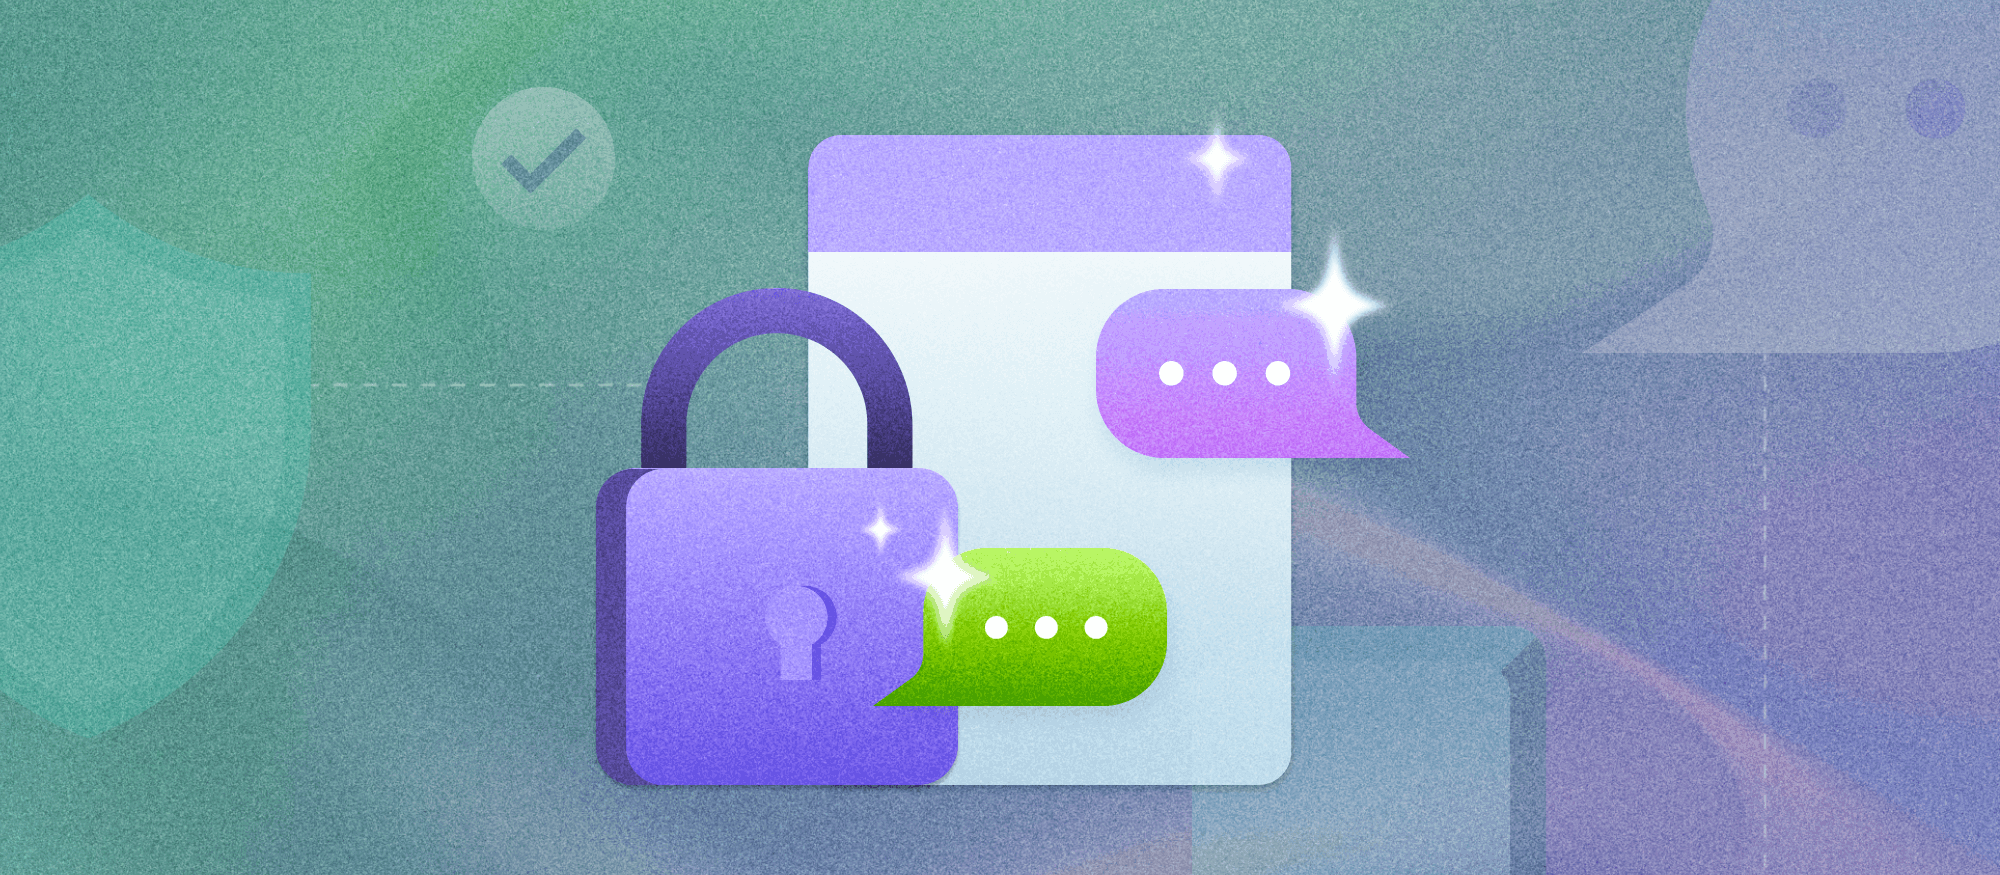 Is the Signal app safe? The encrypted messaging platform and